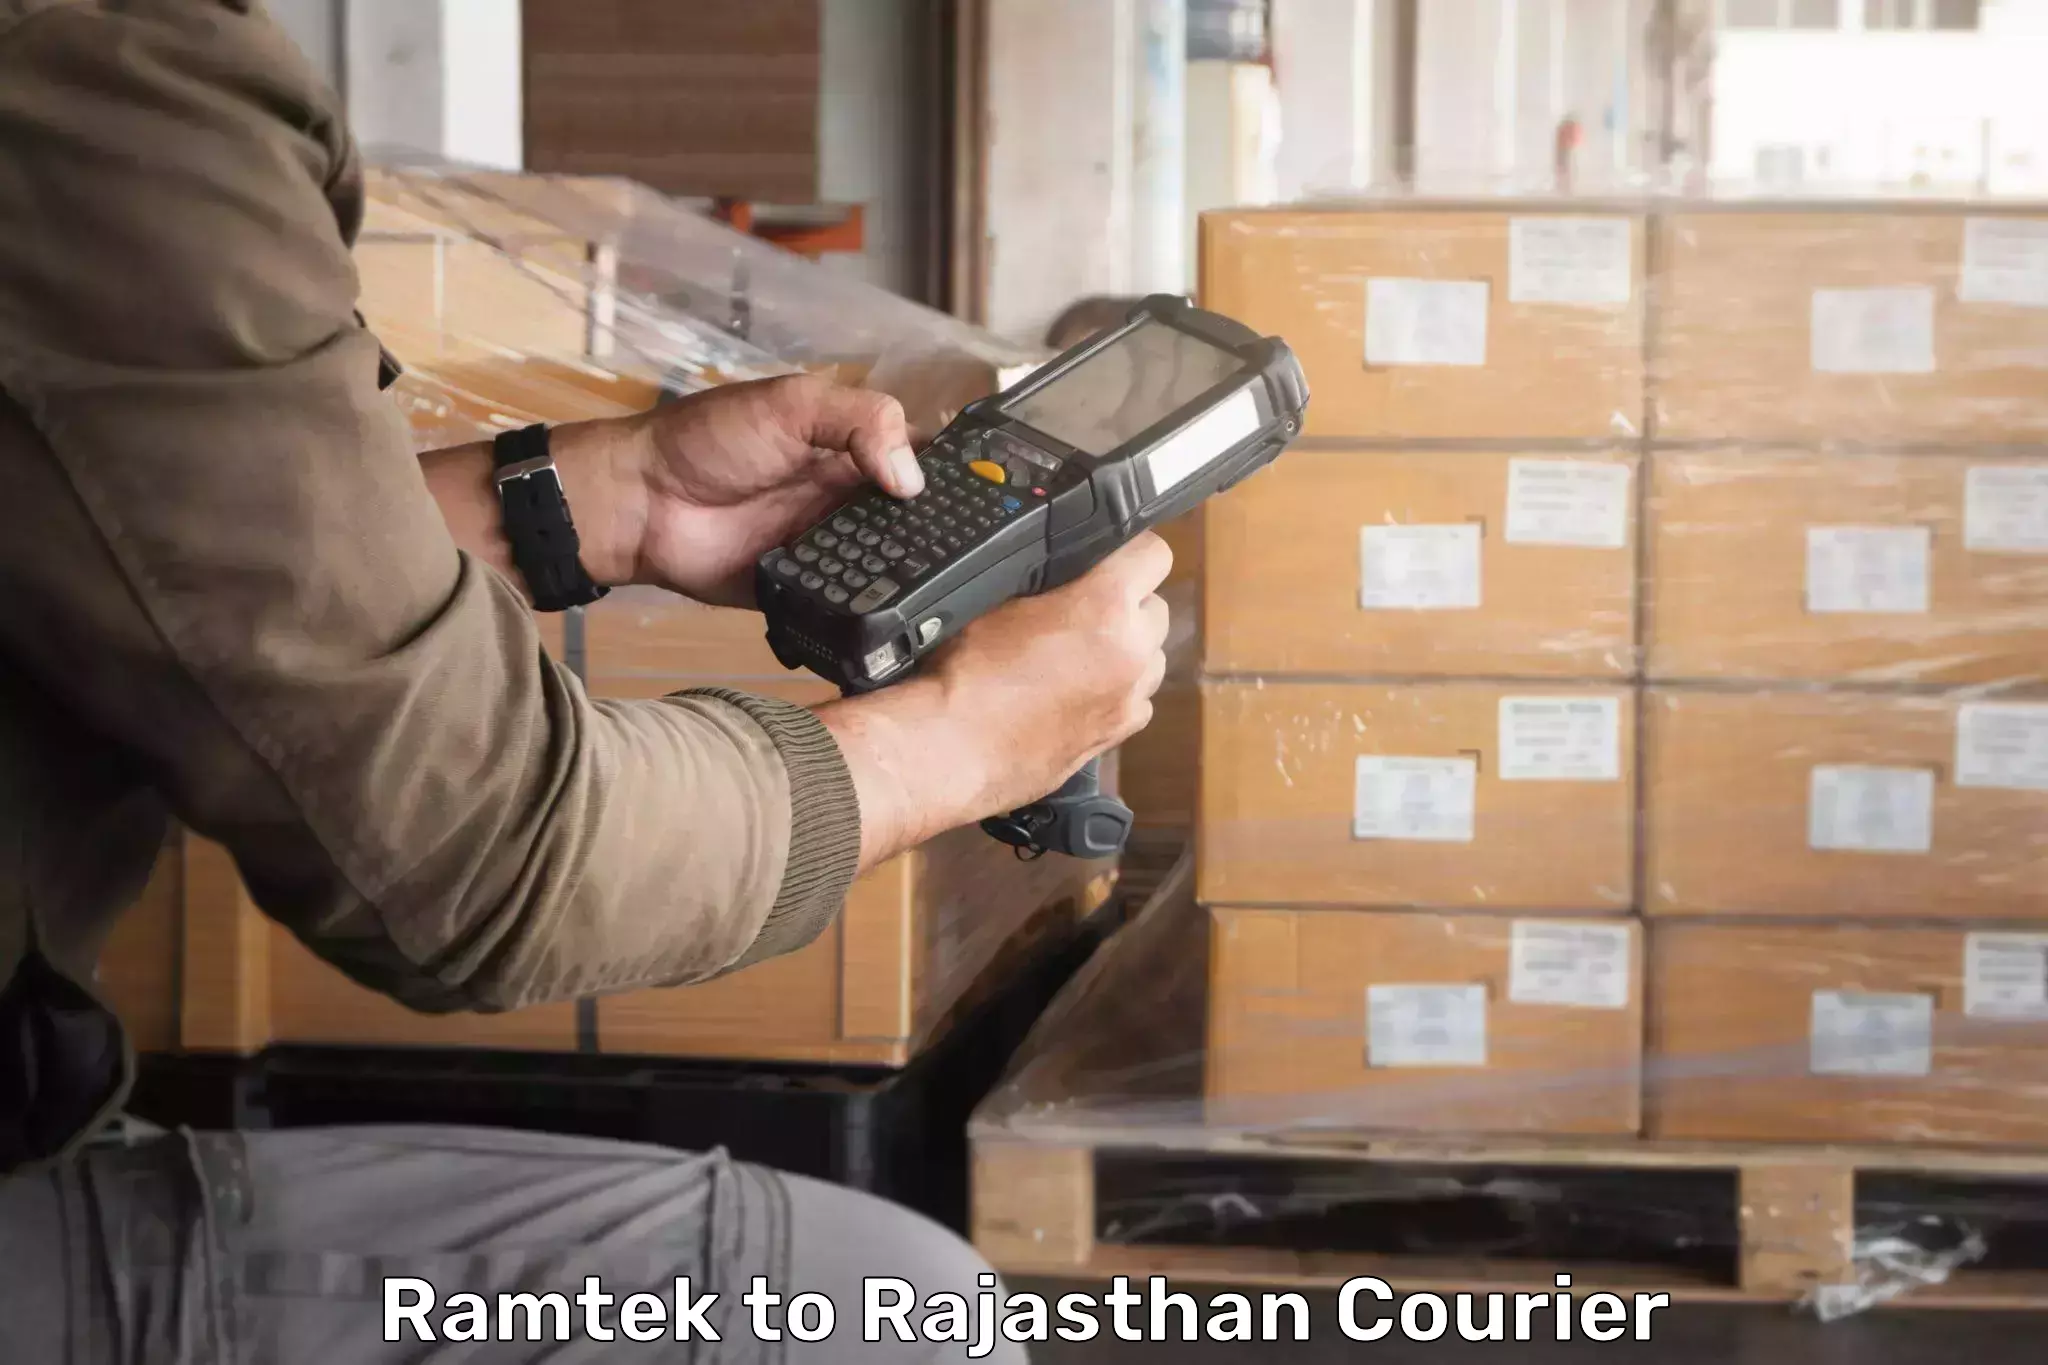 Courier service partnerships Ramtek to Piparcity